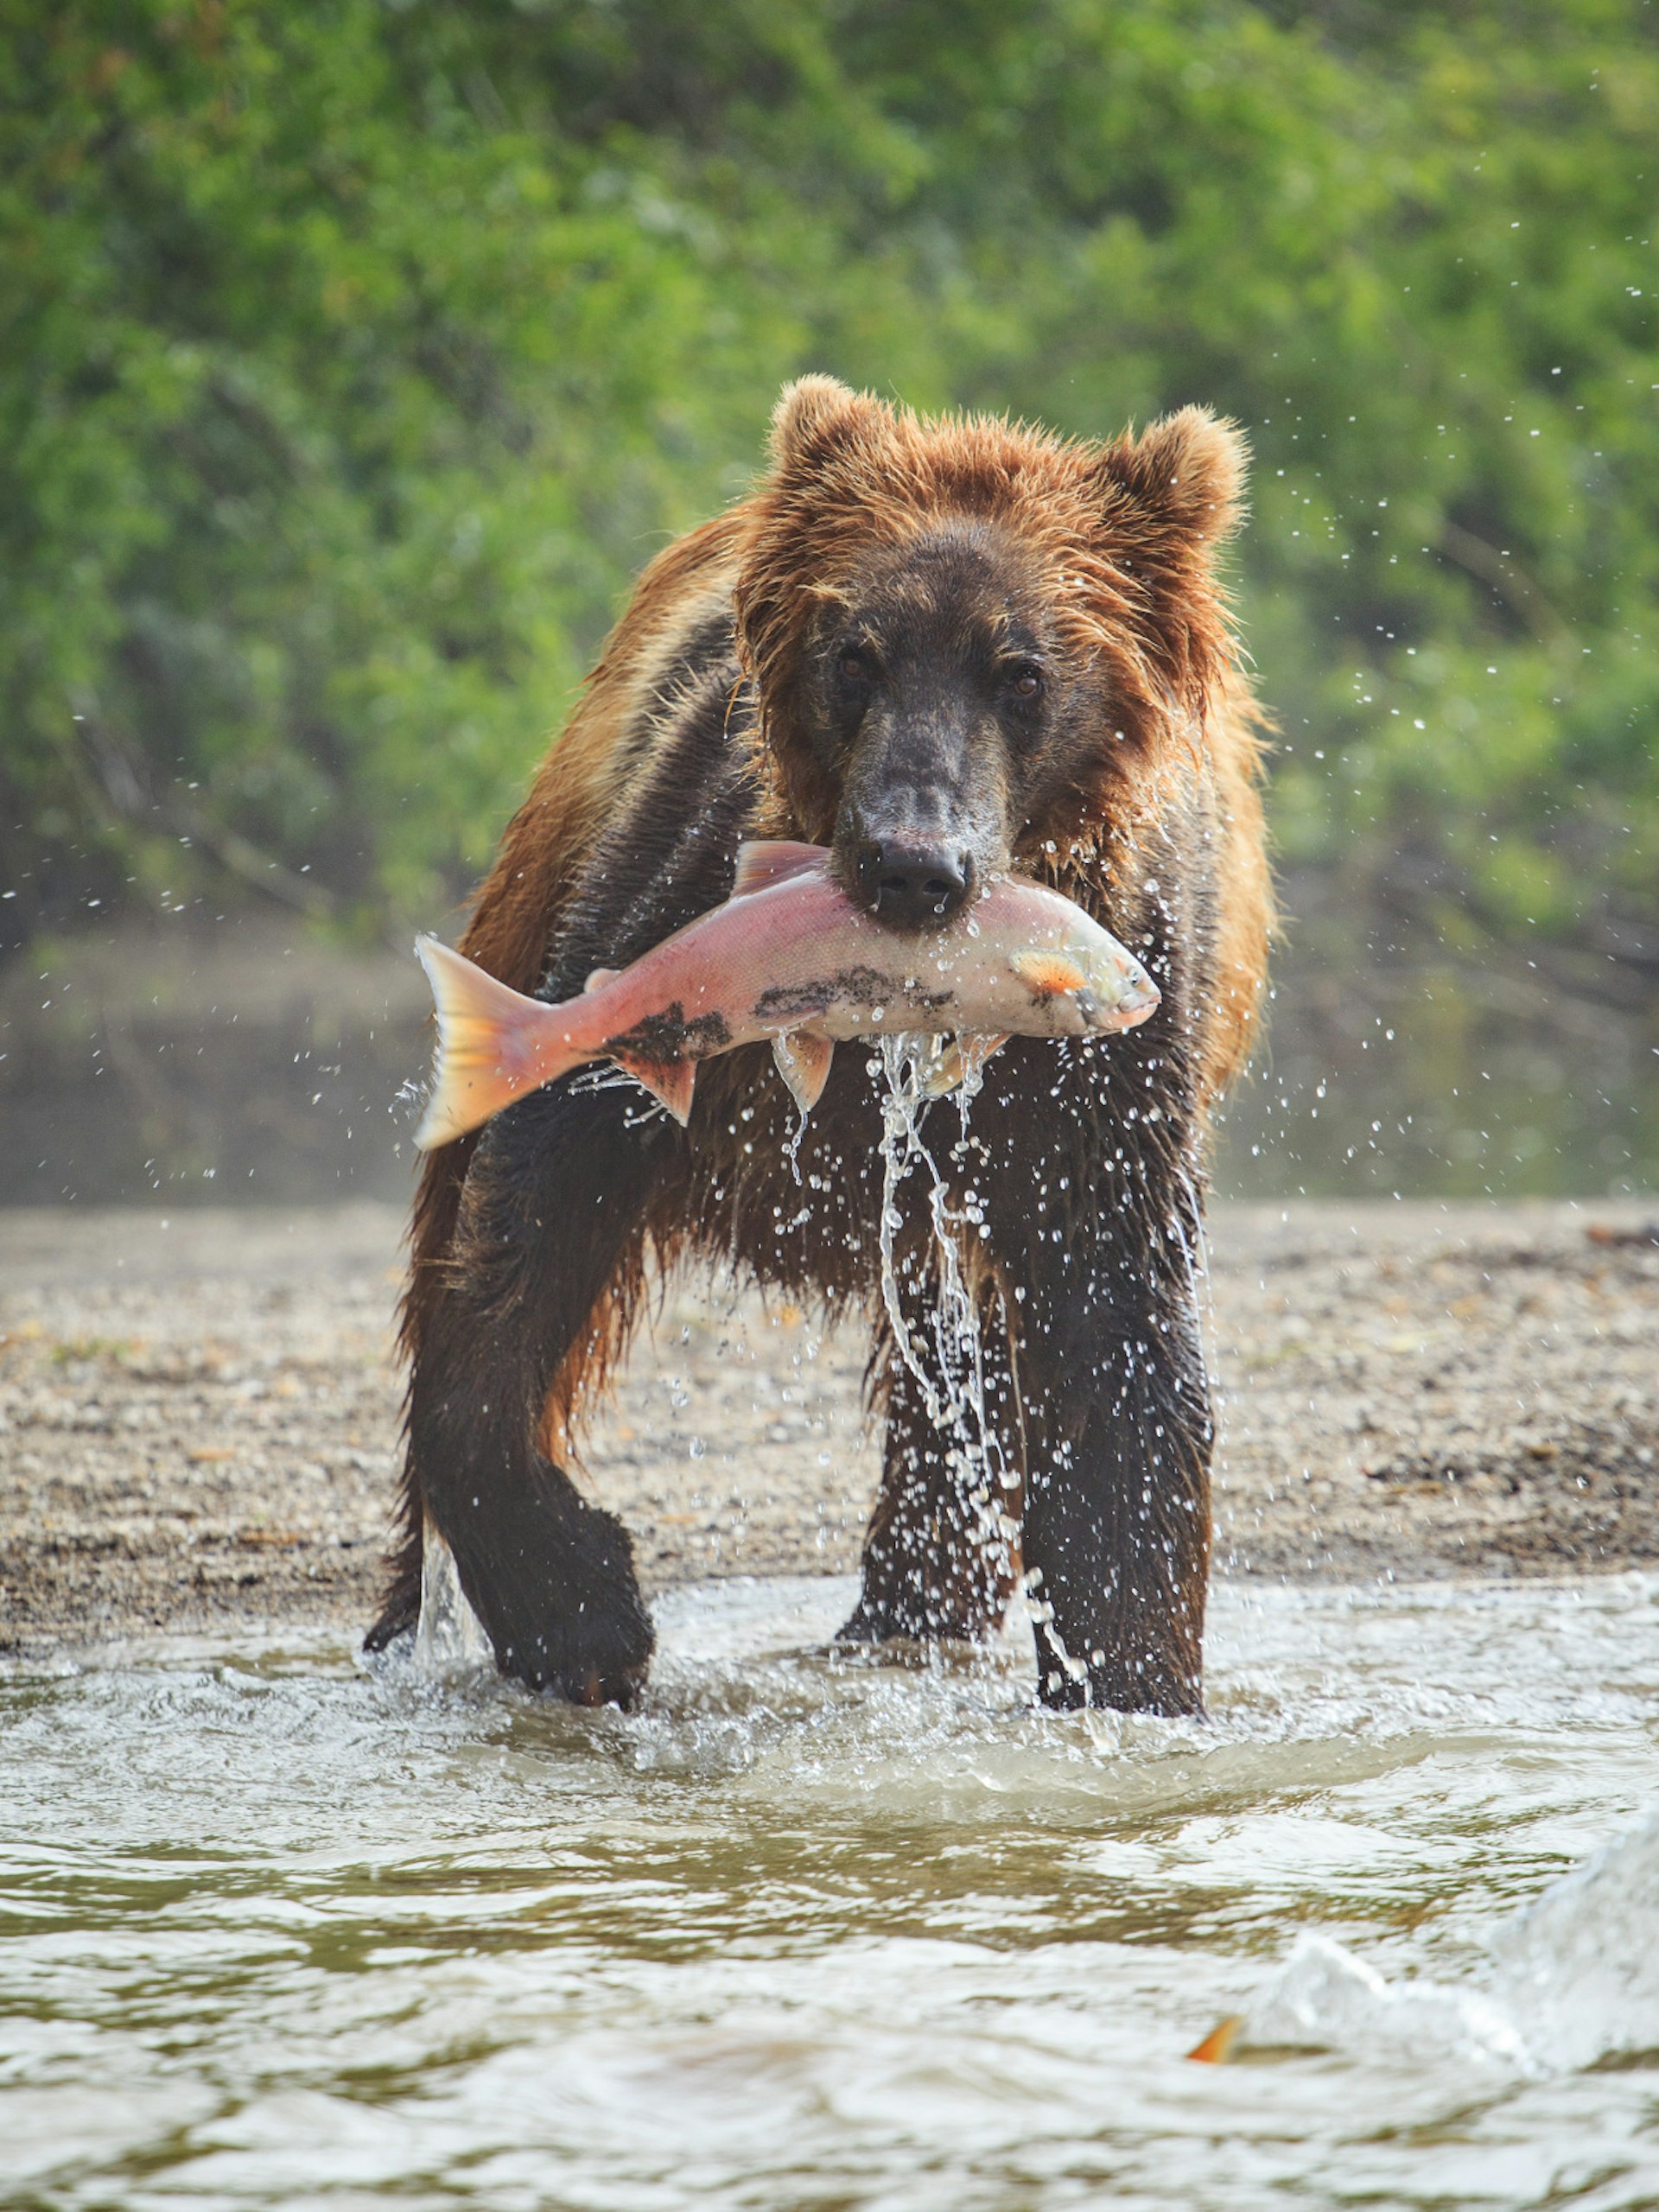 A brown bear hunts salmon in the cold water of a lake in Kamchatka © Dan Weits / Shutterstock